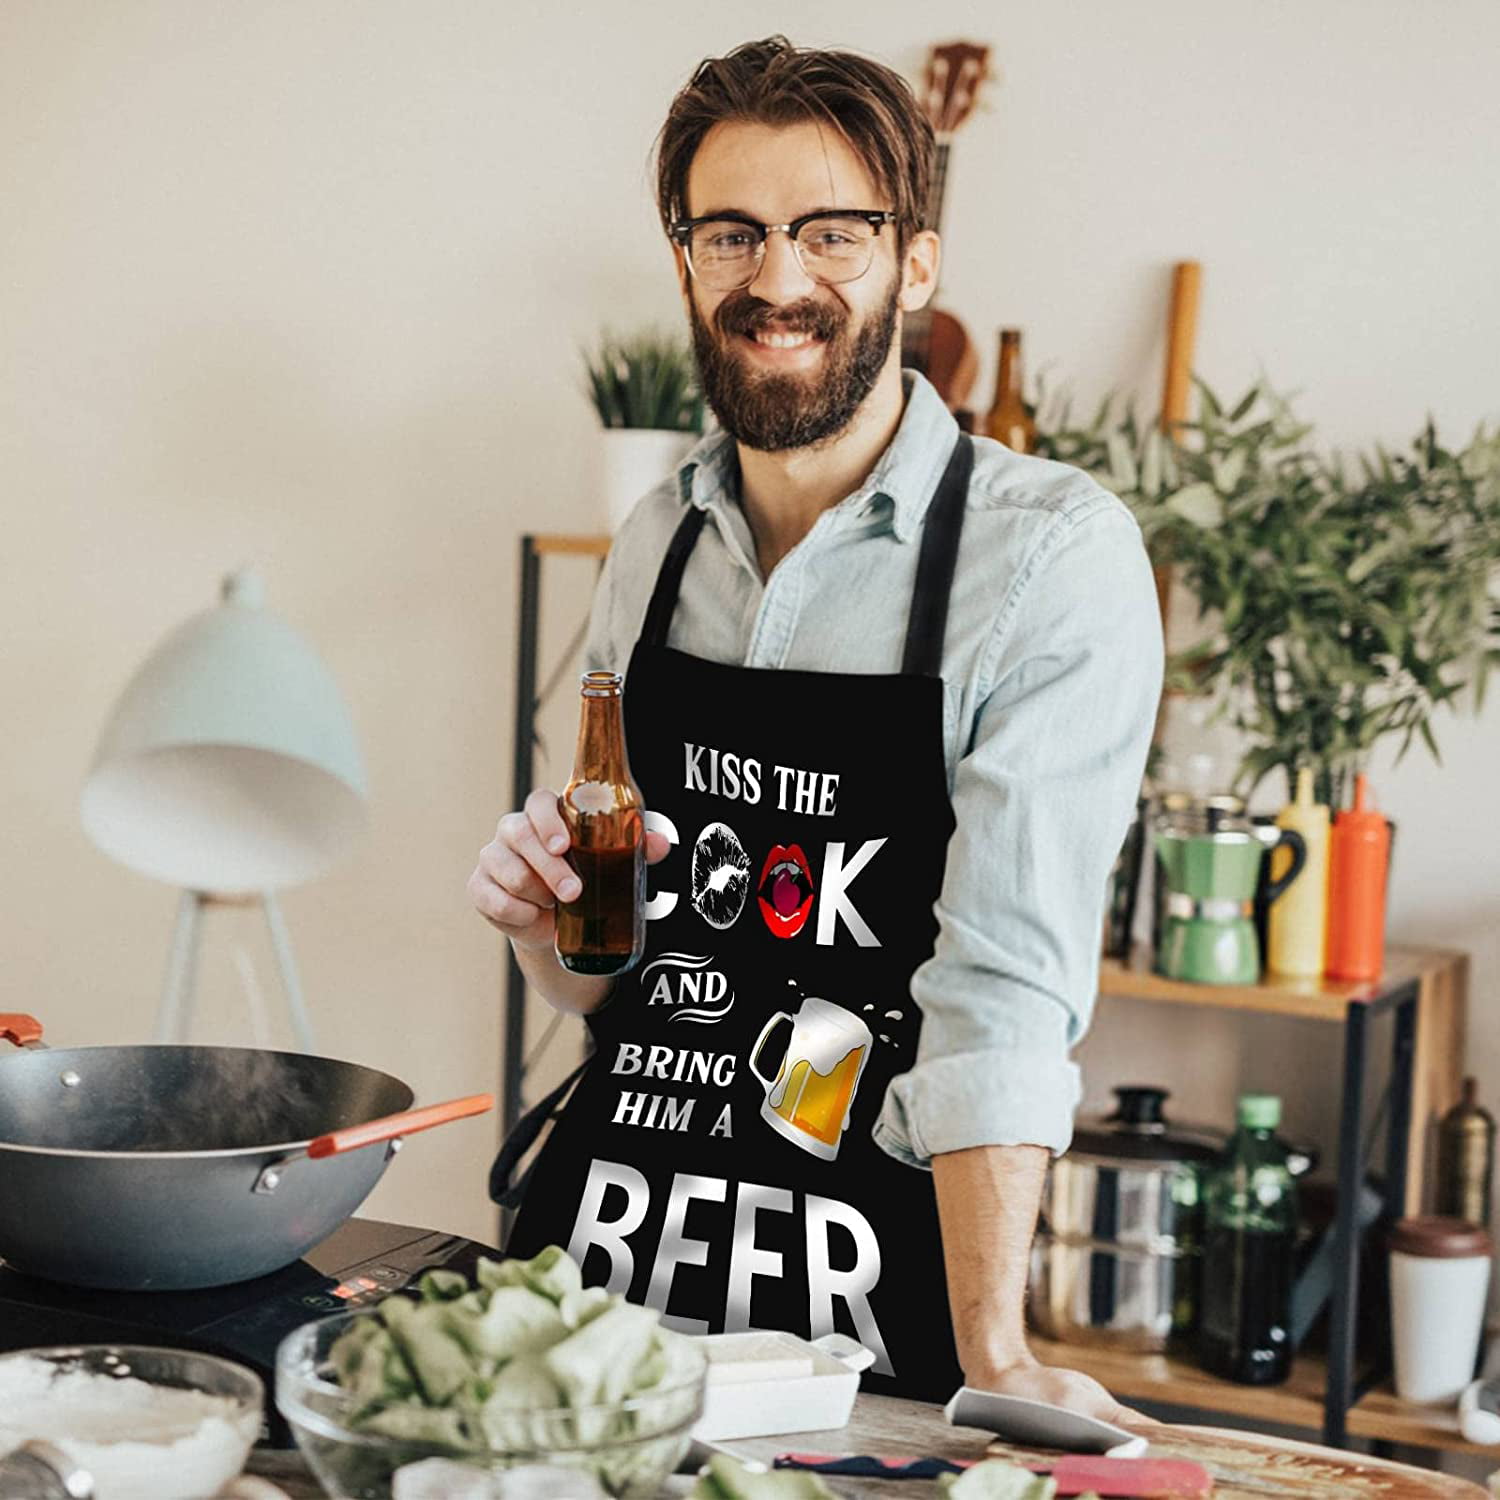 Miracu Funny Apron for Men, Women - Funny Dad Gifts, Gifts for Dad -  Valentines Day, Birthday, Grilling Gifts for Men, Boyfriend Husband Brother  Mom 